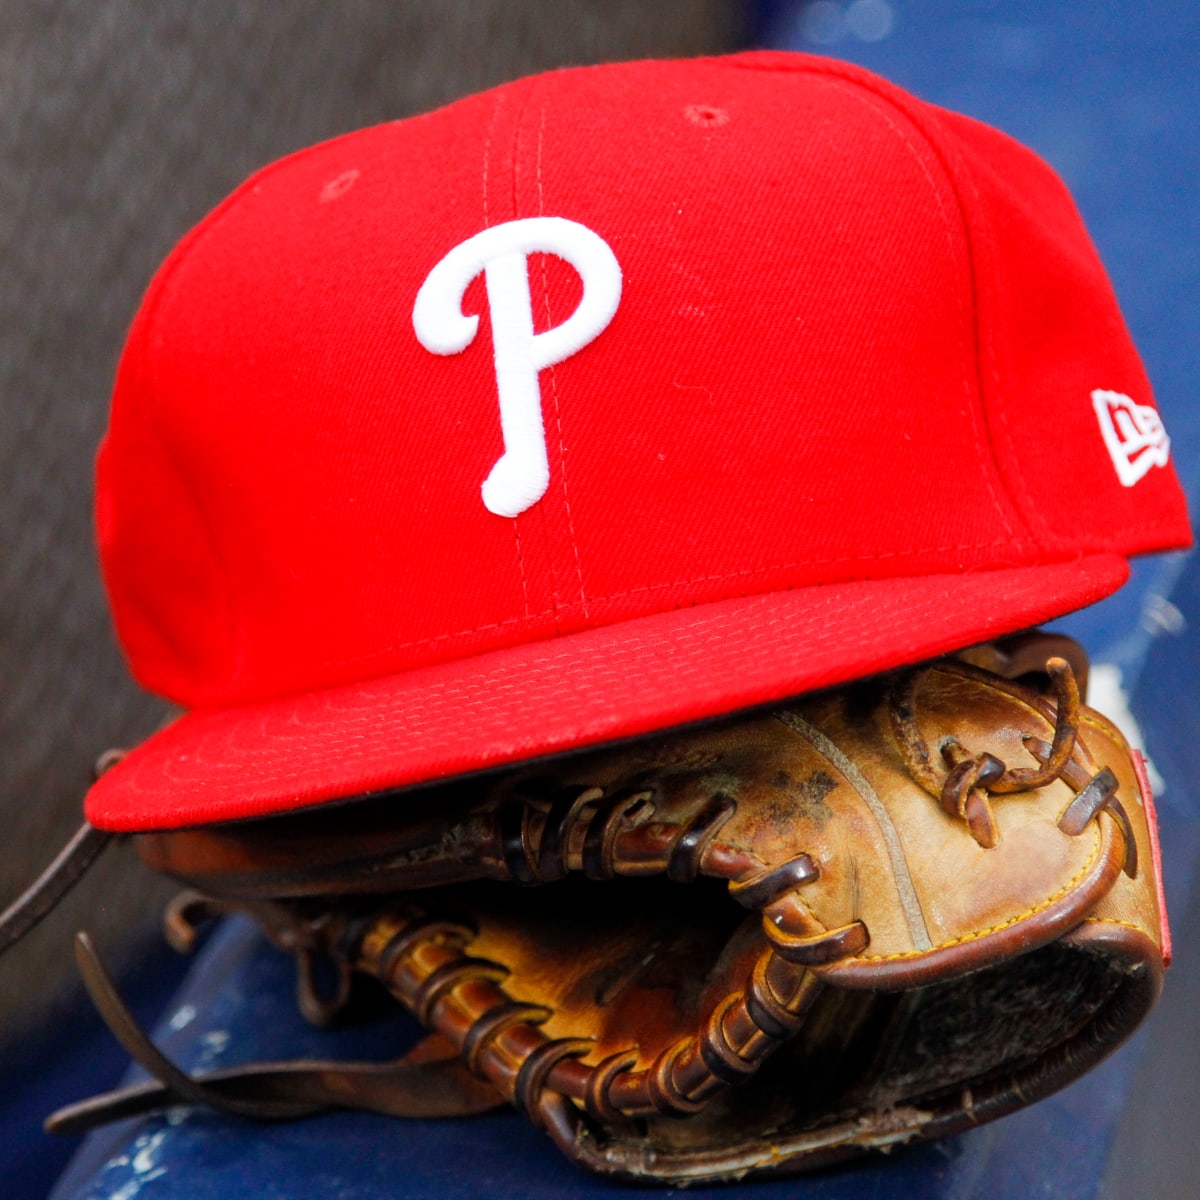 Phillies prospect Logan O'Hoppe has always been a catcher and that